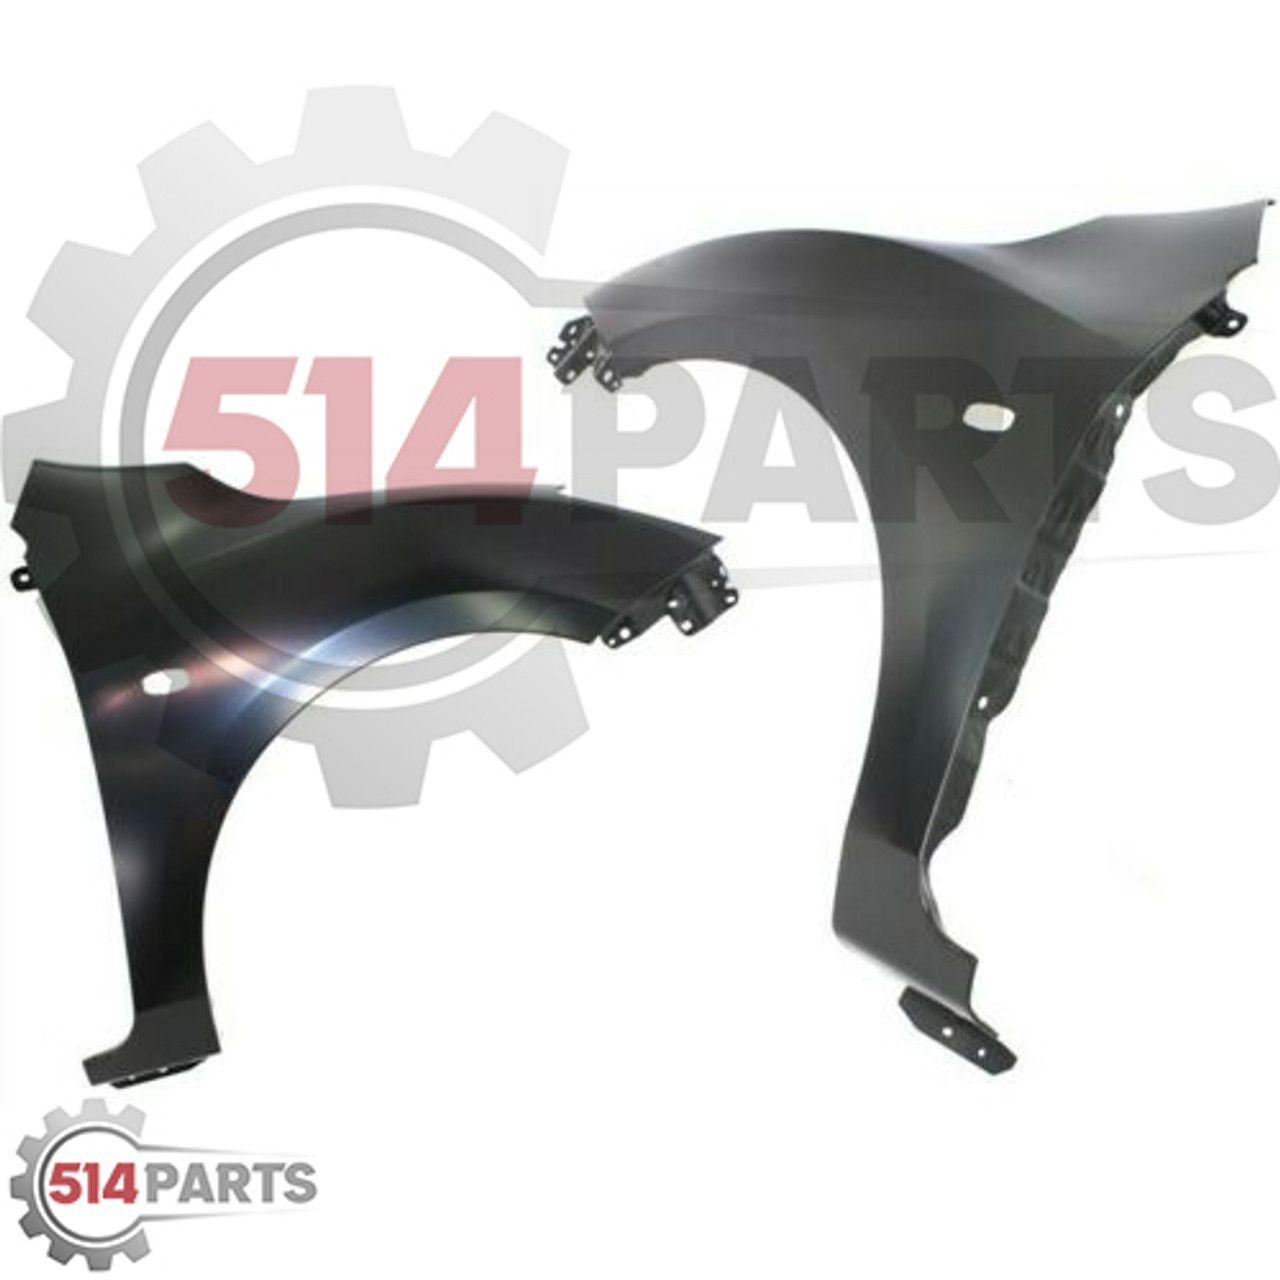 2010 - 2013 MAZDA 3 and MAZDA 3 SPORT(CANADA) CAPA Certified FRONT FENDERS with SIGNAL LAMP HOLE, without MOULDING HOLE - AILES AVANT avec TROU DE FEU DE SIGNALISATION, sans TROU DE MOULAGE CAPA Certifiee